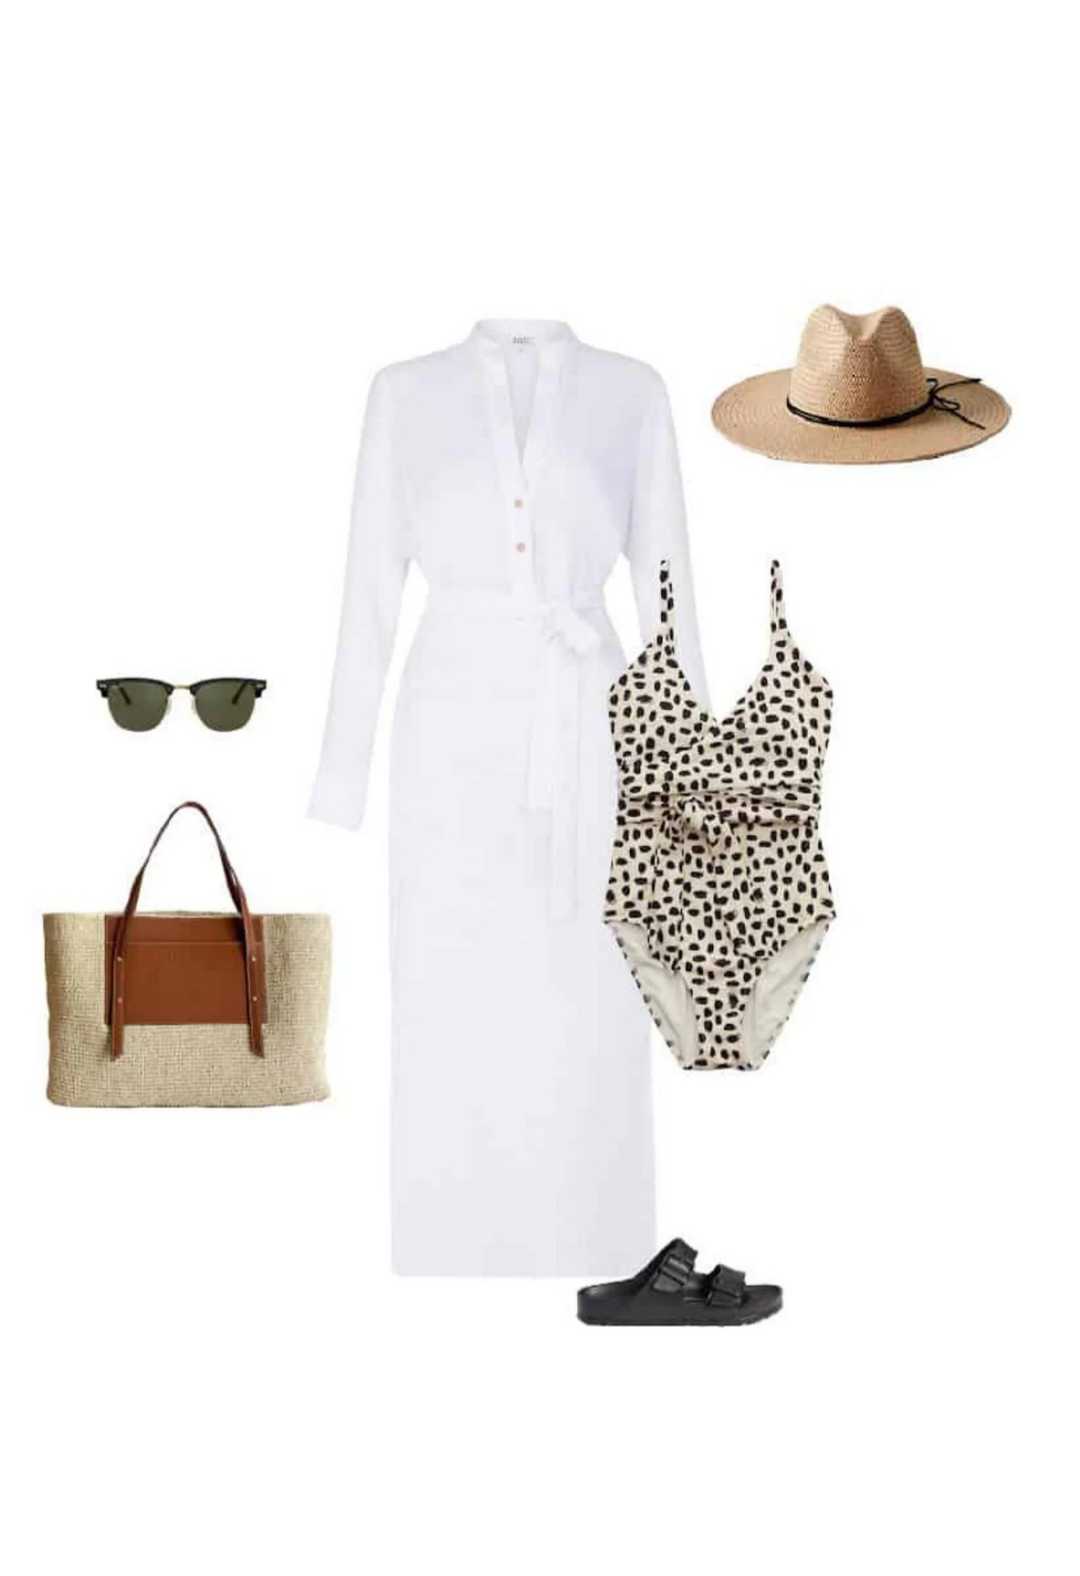 From Beach to Brunch: Summer Fashion Essentials for Every Woman